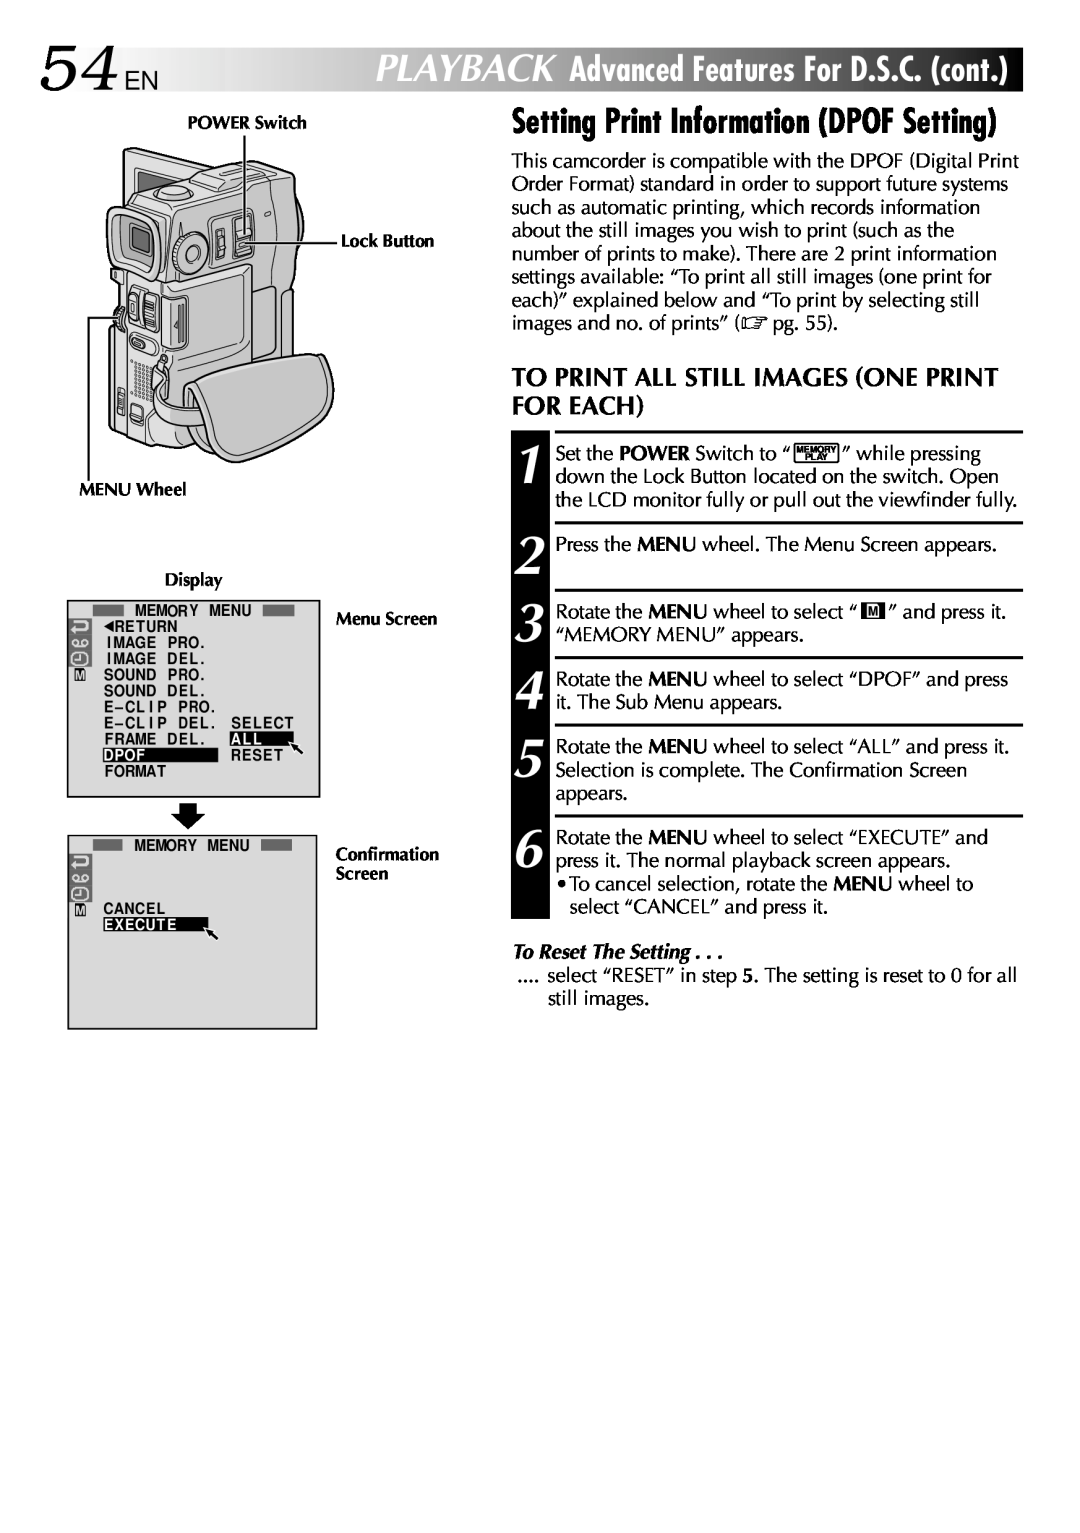 JVC GR-DVX10 specifications 54 EN, To Print All Still Images One Print For Each, To Reset The Setting 